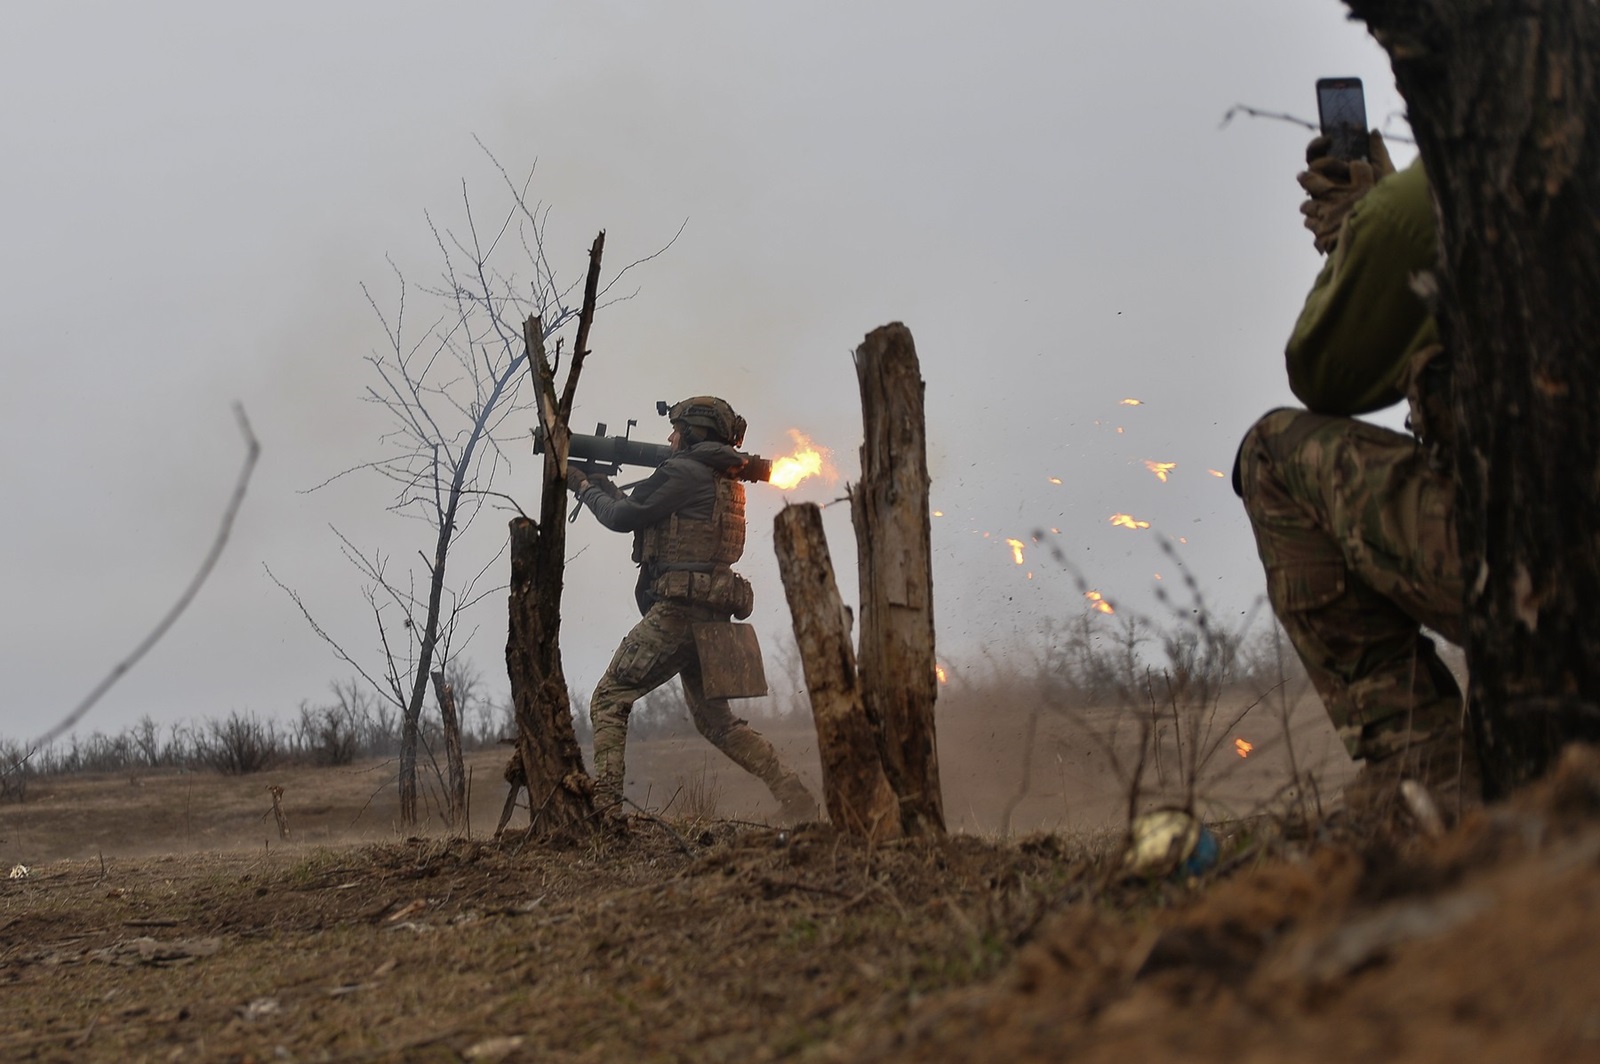 March 7, 2024, Bakhmut, Donetsk Oblast, Ukraine: ZHENYA, a Ukrainian soldier, fires a hornet system at Russian lines a few hundred meters away. Russian infantry positions are 100m away from Ukrainian lines.,Image: 854738281, License: Rights-managed, Restrictions: , Model Release: no, Credit line: Madeleine Kelly / Zuma Press / Profimedia